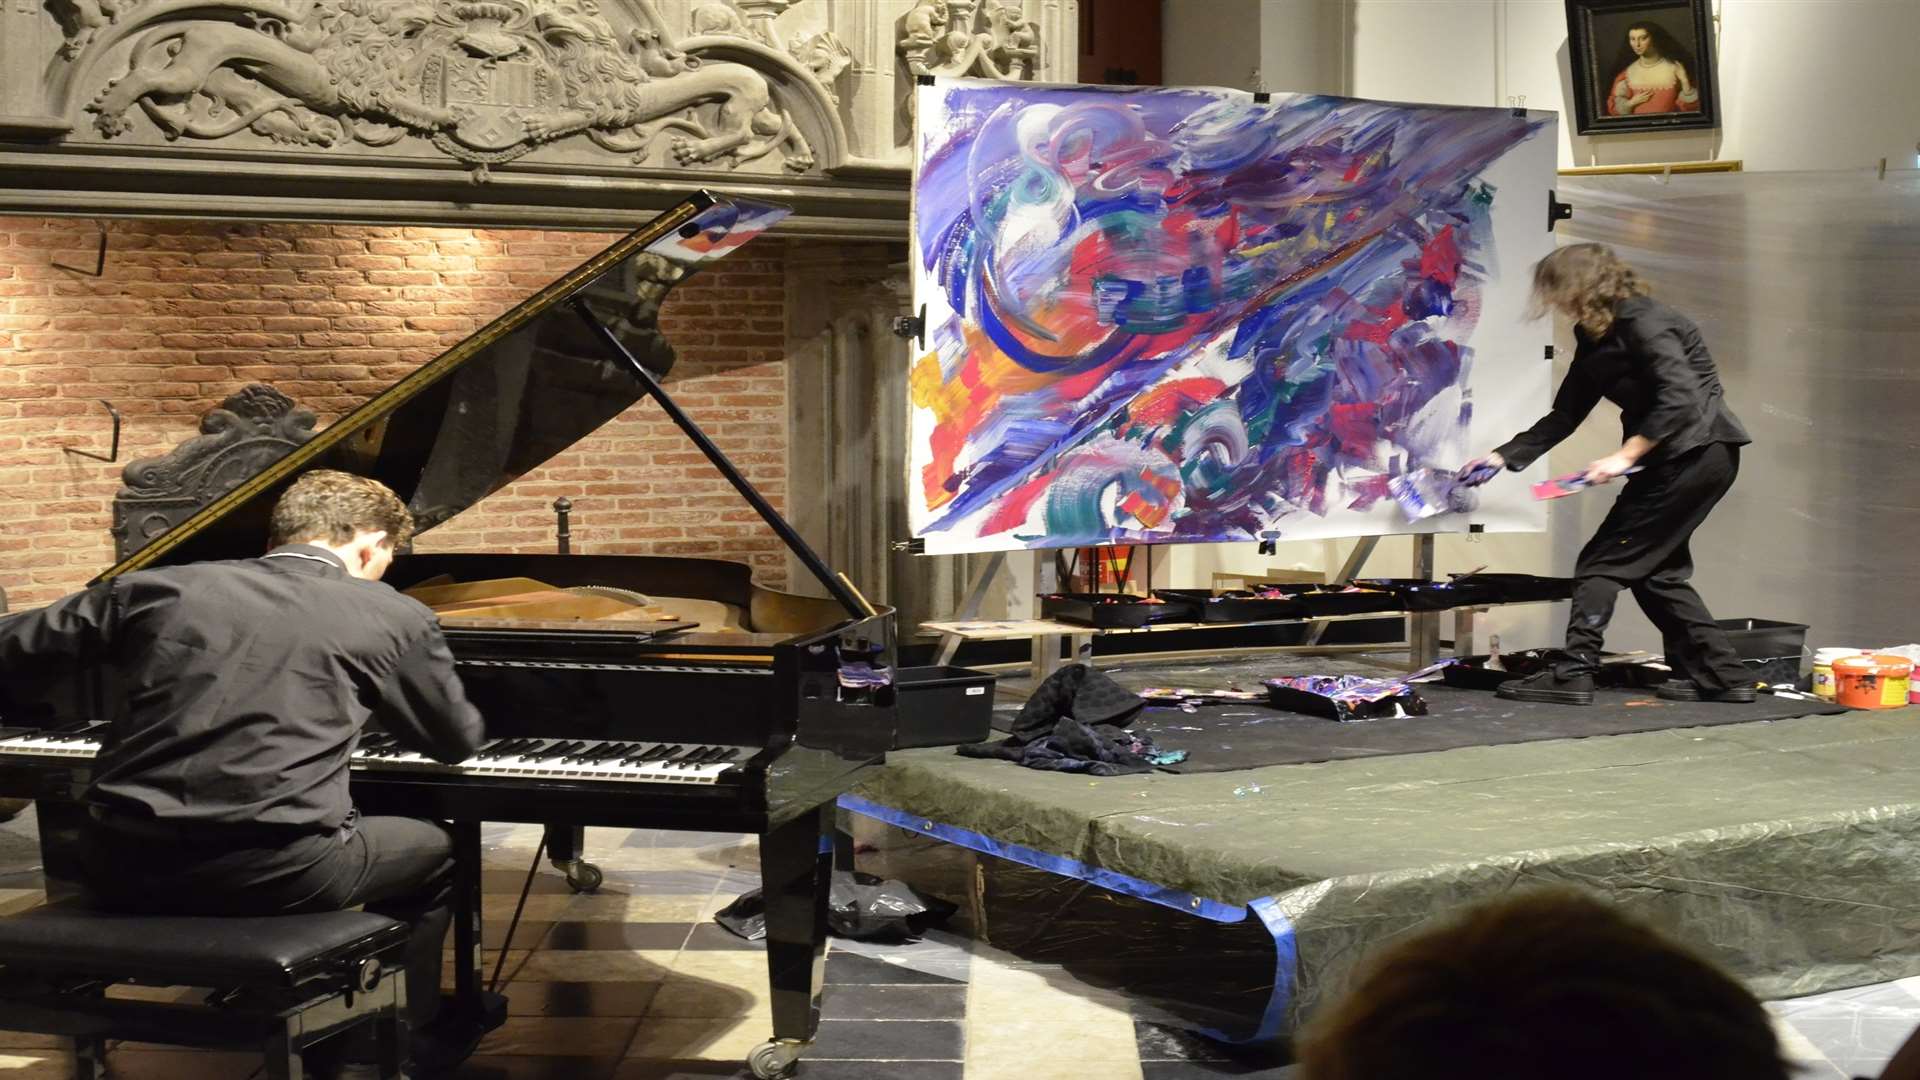 A music painting live performance with pianist Reinis Zarins